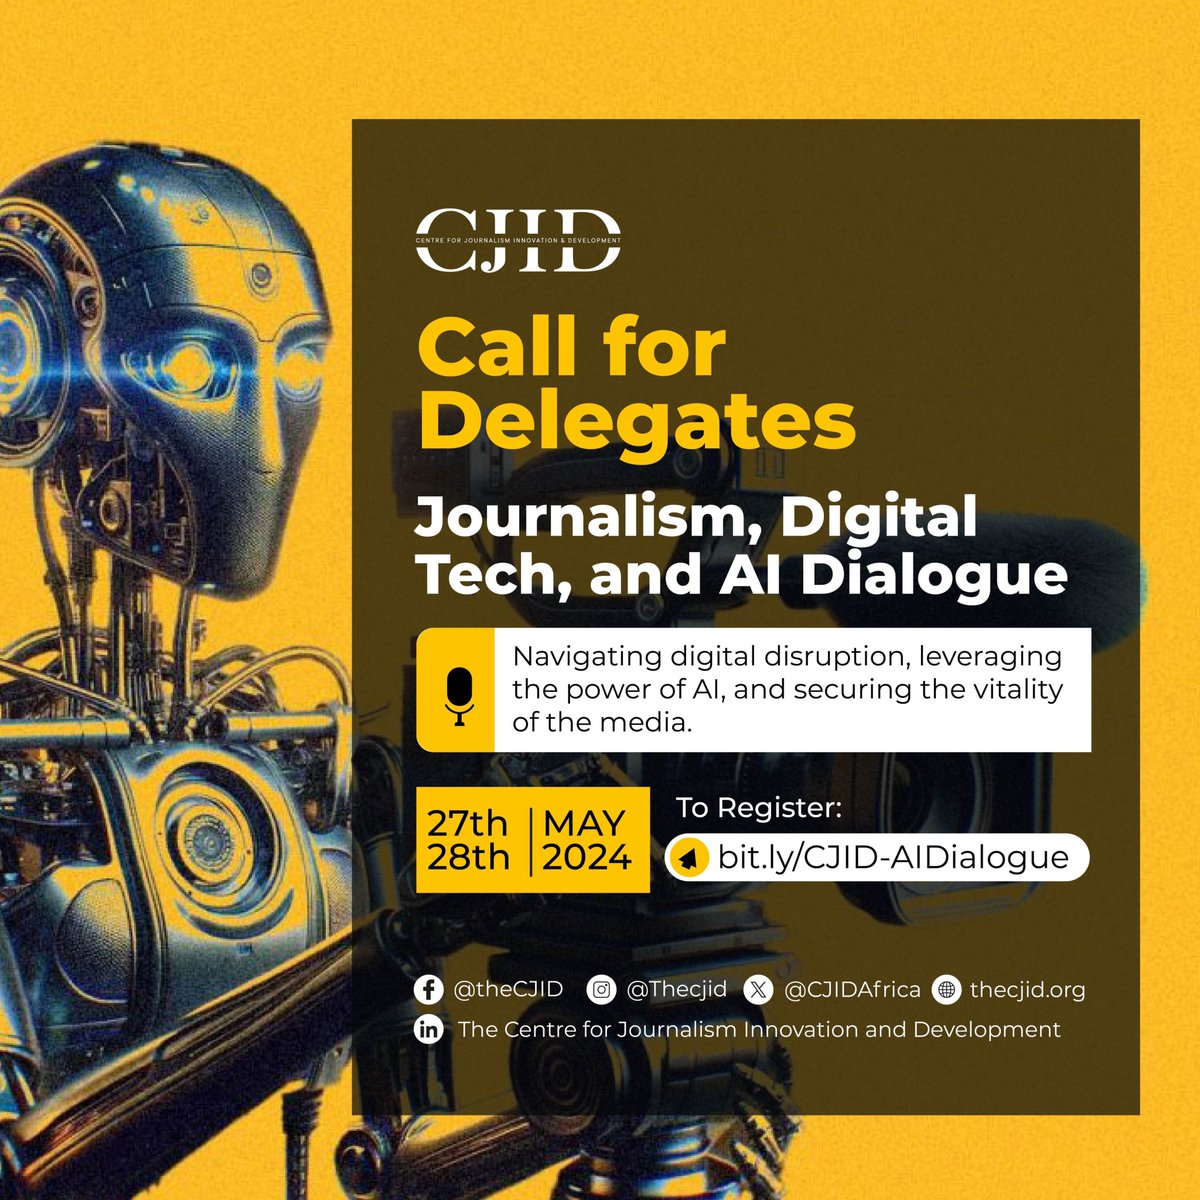 Call for Delegates! In an era where the media practice is continuously evolving, Artificial Intelligence and digital technologies are shaking and reshaping how news and information are delivered. But with innovation comes challenges—how do we adapt and thrive in this changing…